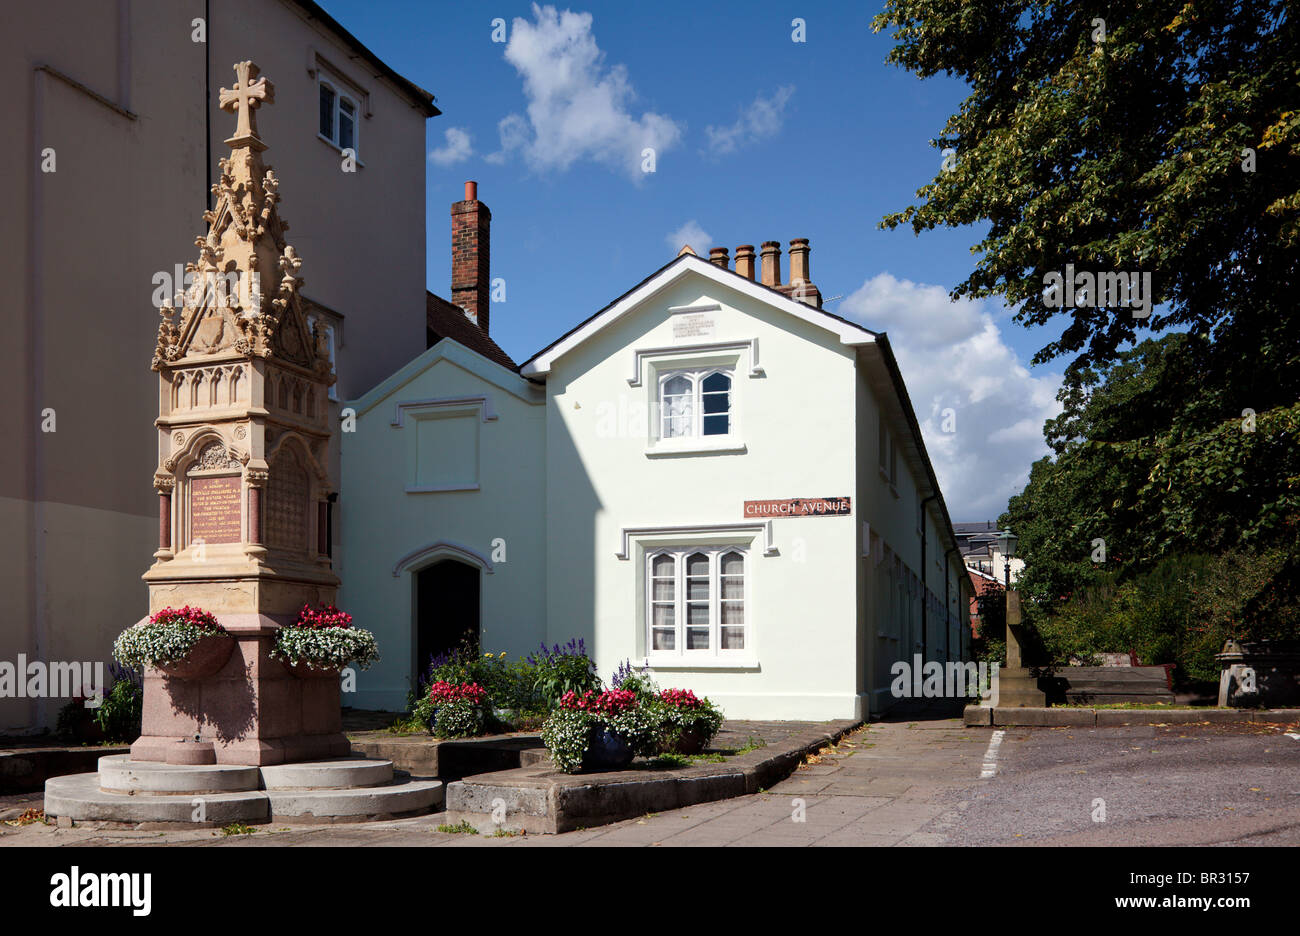 Drinking Fountain and Alms Houses Henley on Thames Oxfordshire England UK Stock Photo